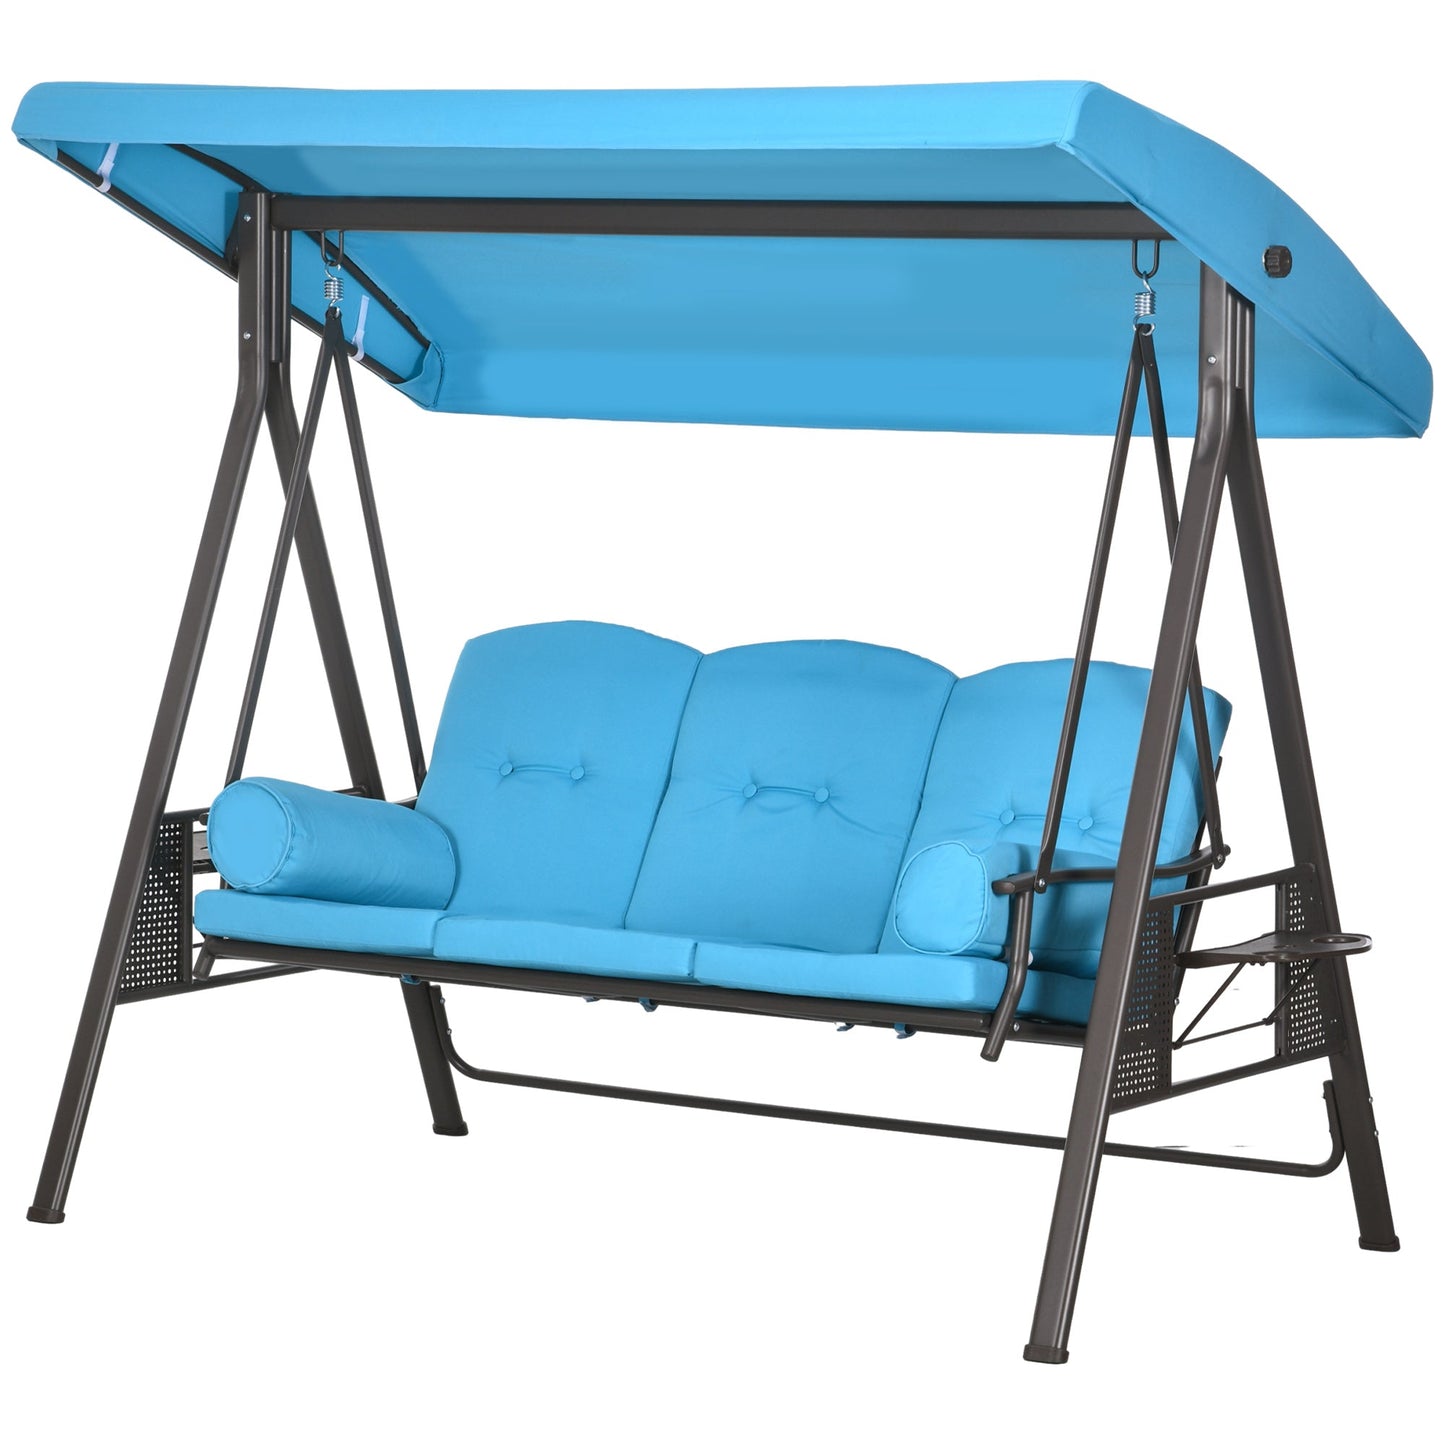 -Outsunny 3-Seat Outdoor Porch Swing Chair with Adjustable Canopy, Cushion and Pillows for Garden, Poolside, Blue - Outdoor Style Company